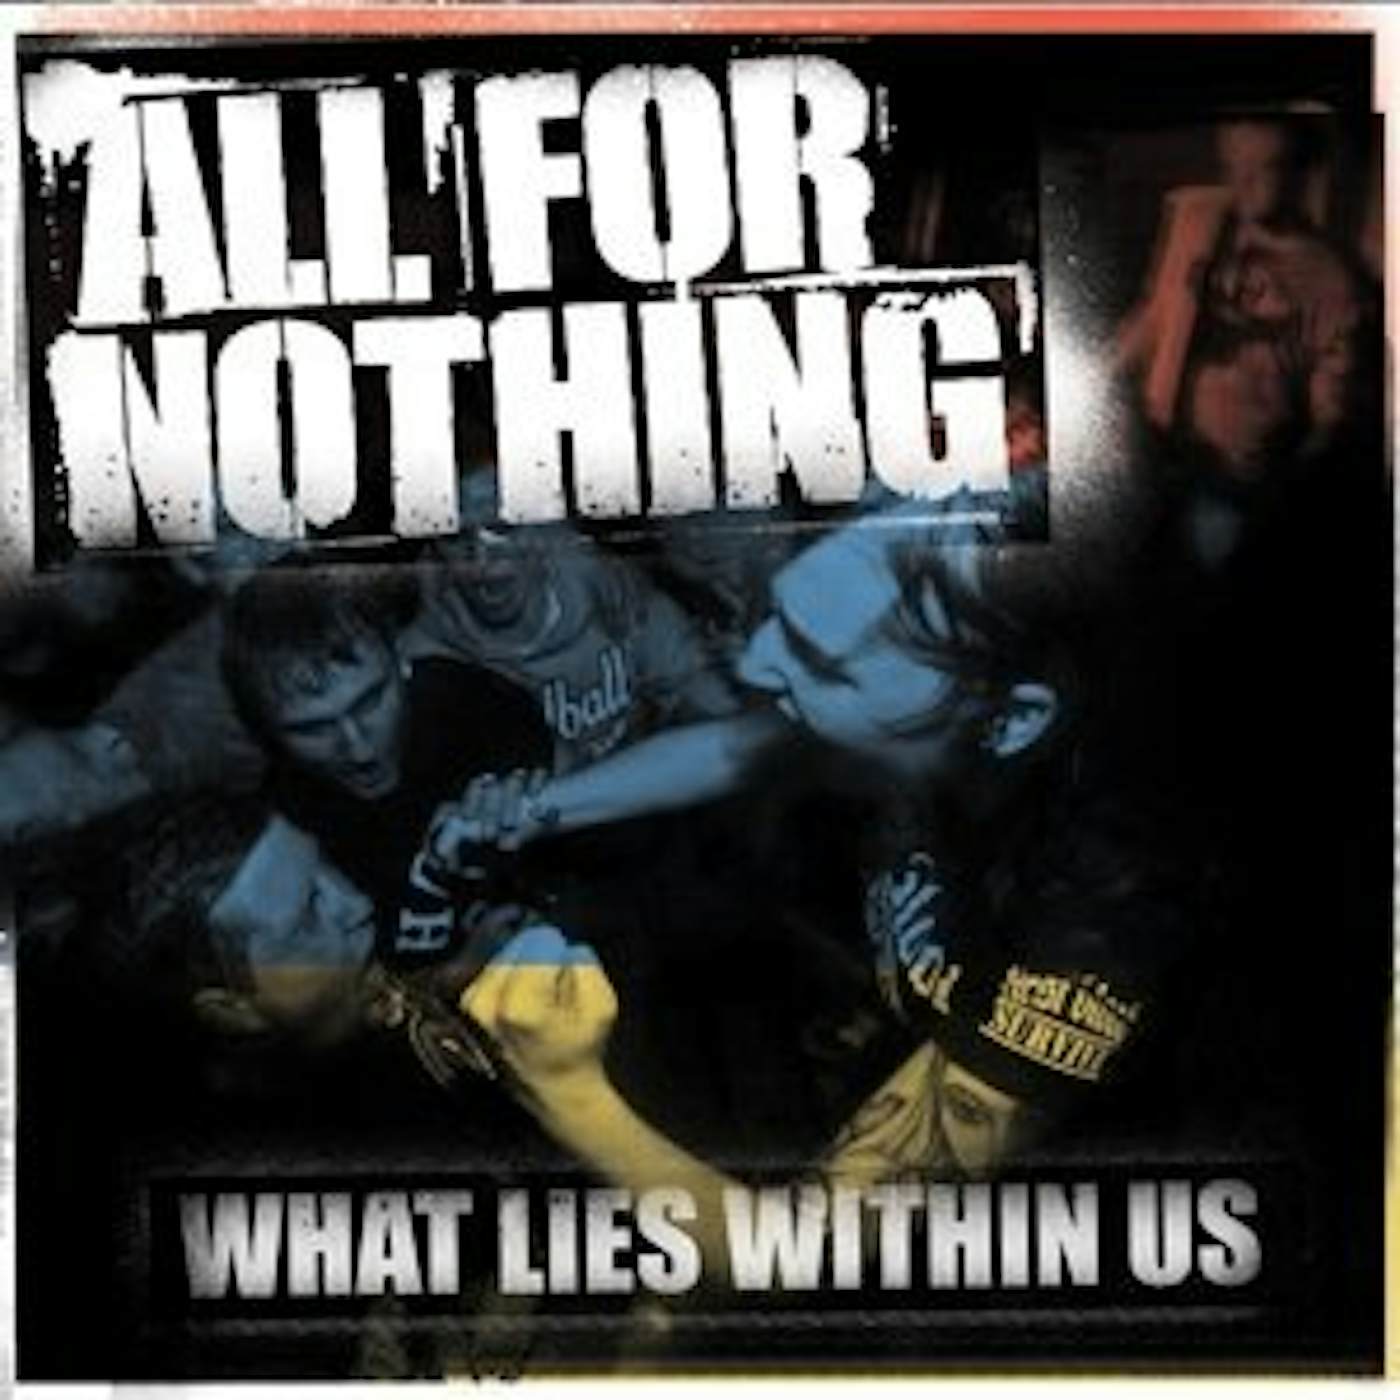 All For Nothing What Lies Within Us Vinyl Record